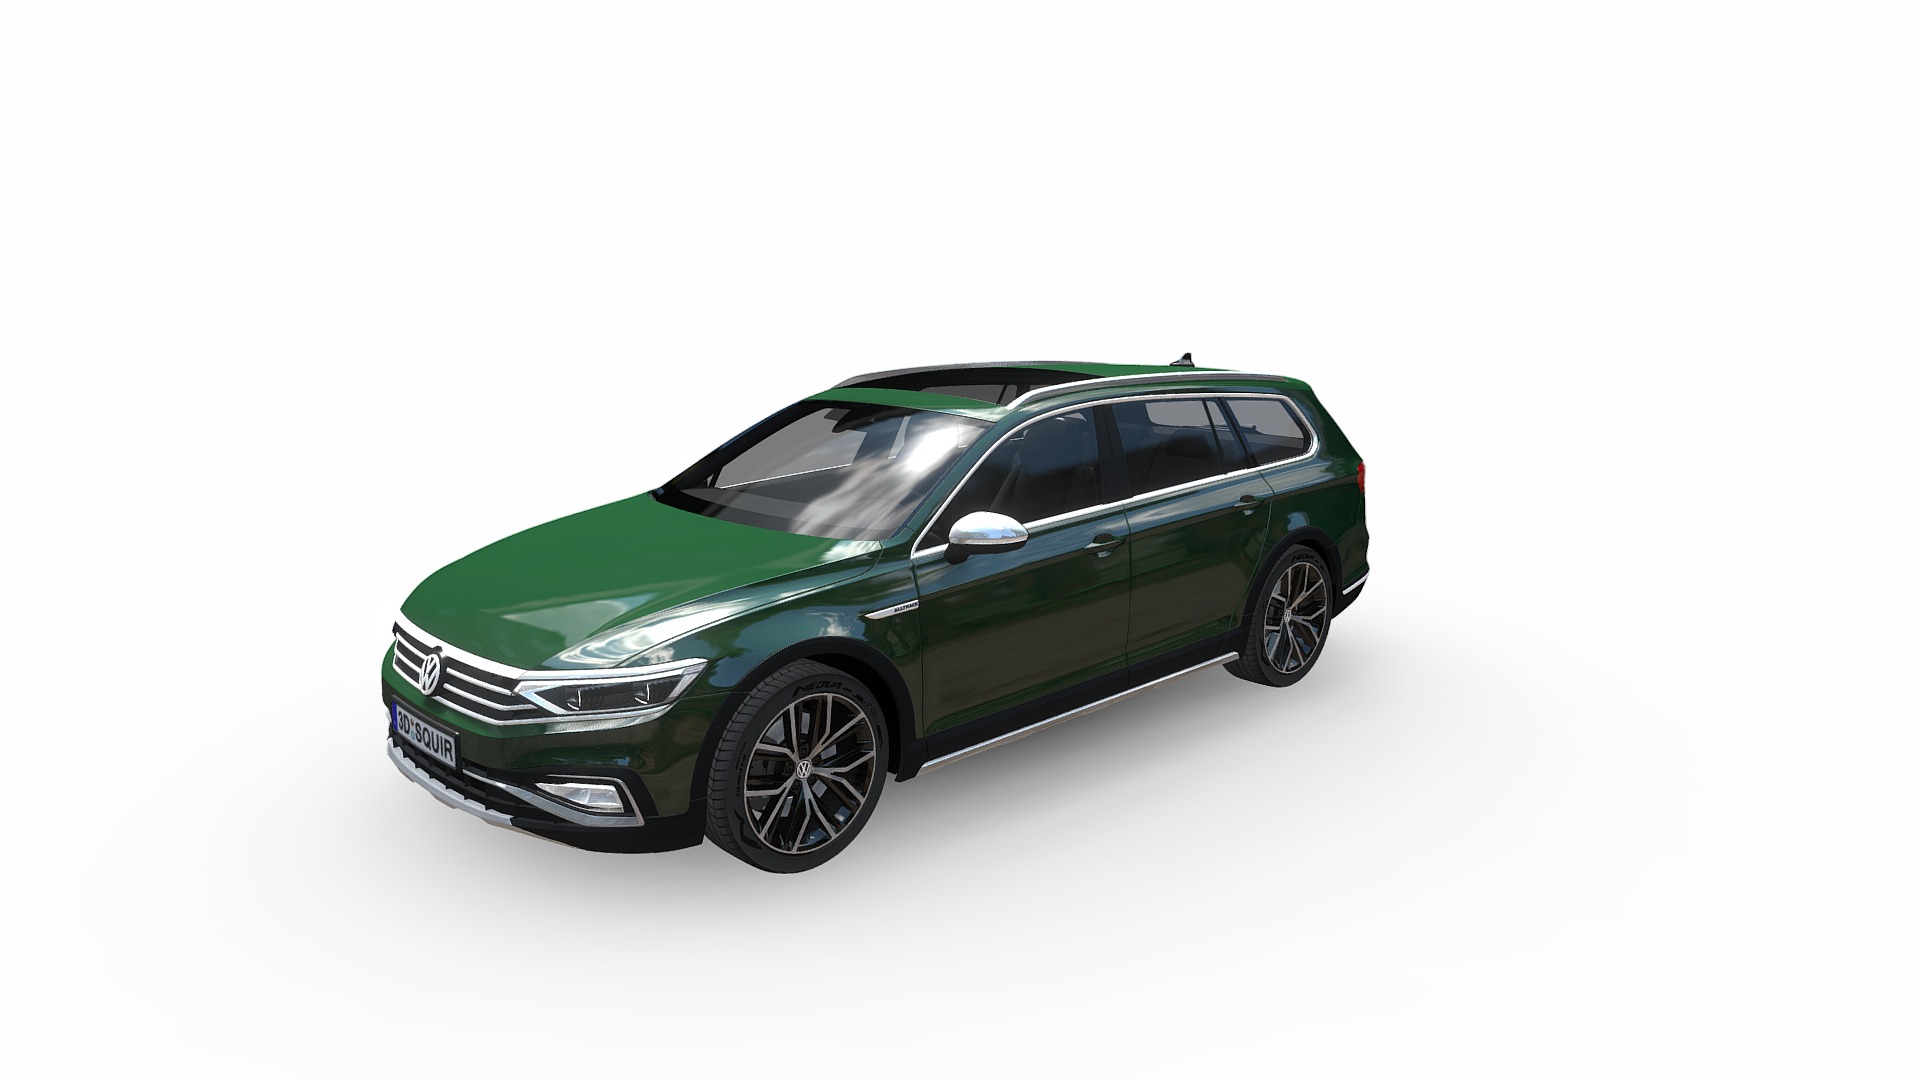 3D model Volkswagen Passat Alltrack 2020 - This is a 3D model of the Volkswagen Passat Alltrack 2020. The 3D model is about a green car with a white background.